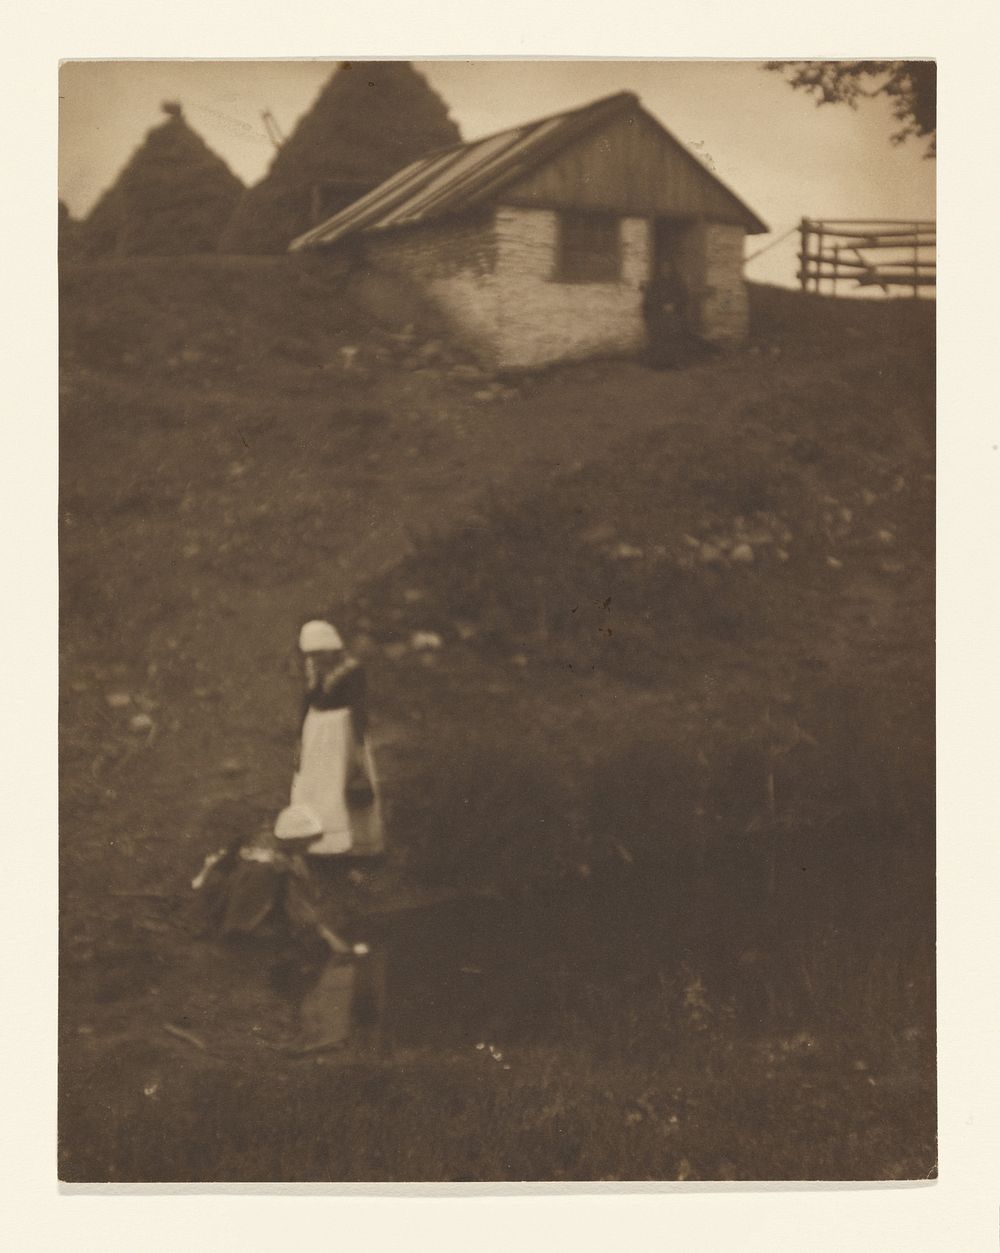 Two Young Girls in Landscape by Louis Fleckenstein